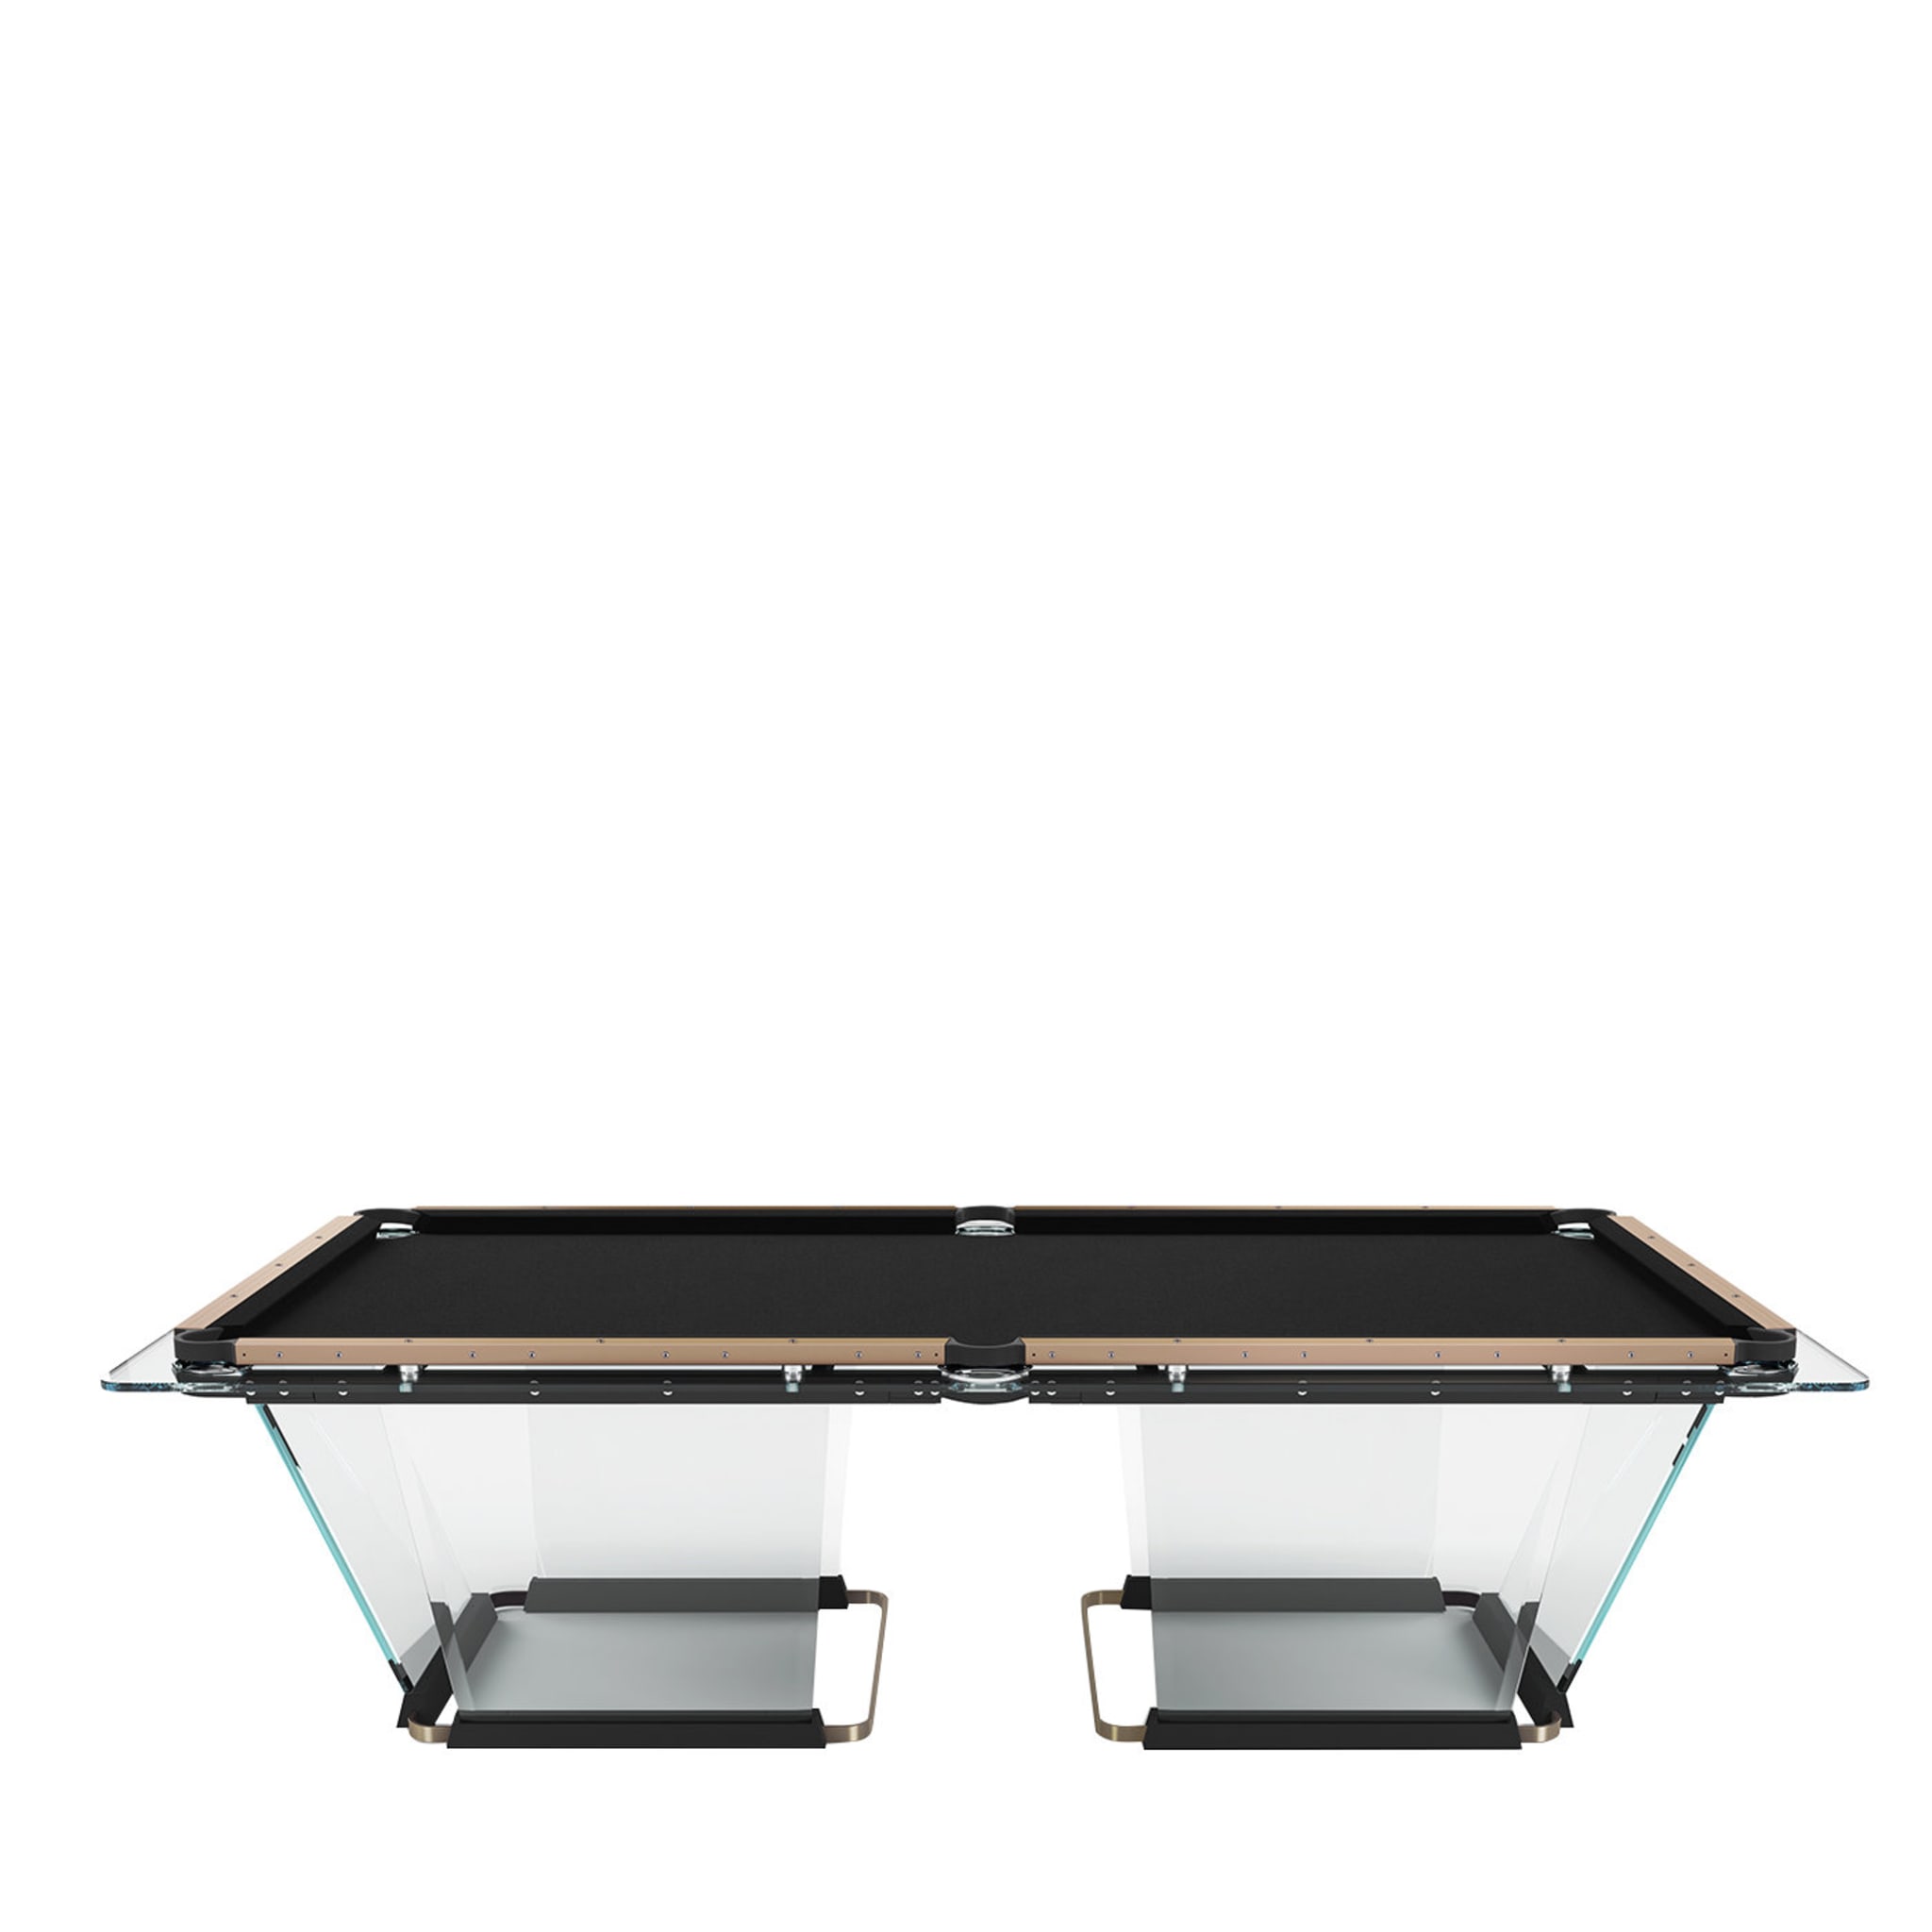 T1 Pool Table by Marc Sadler #2 - Main view